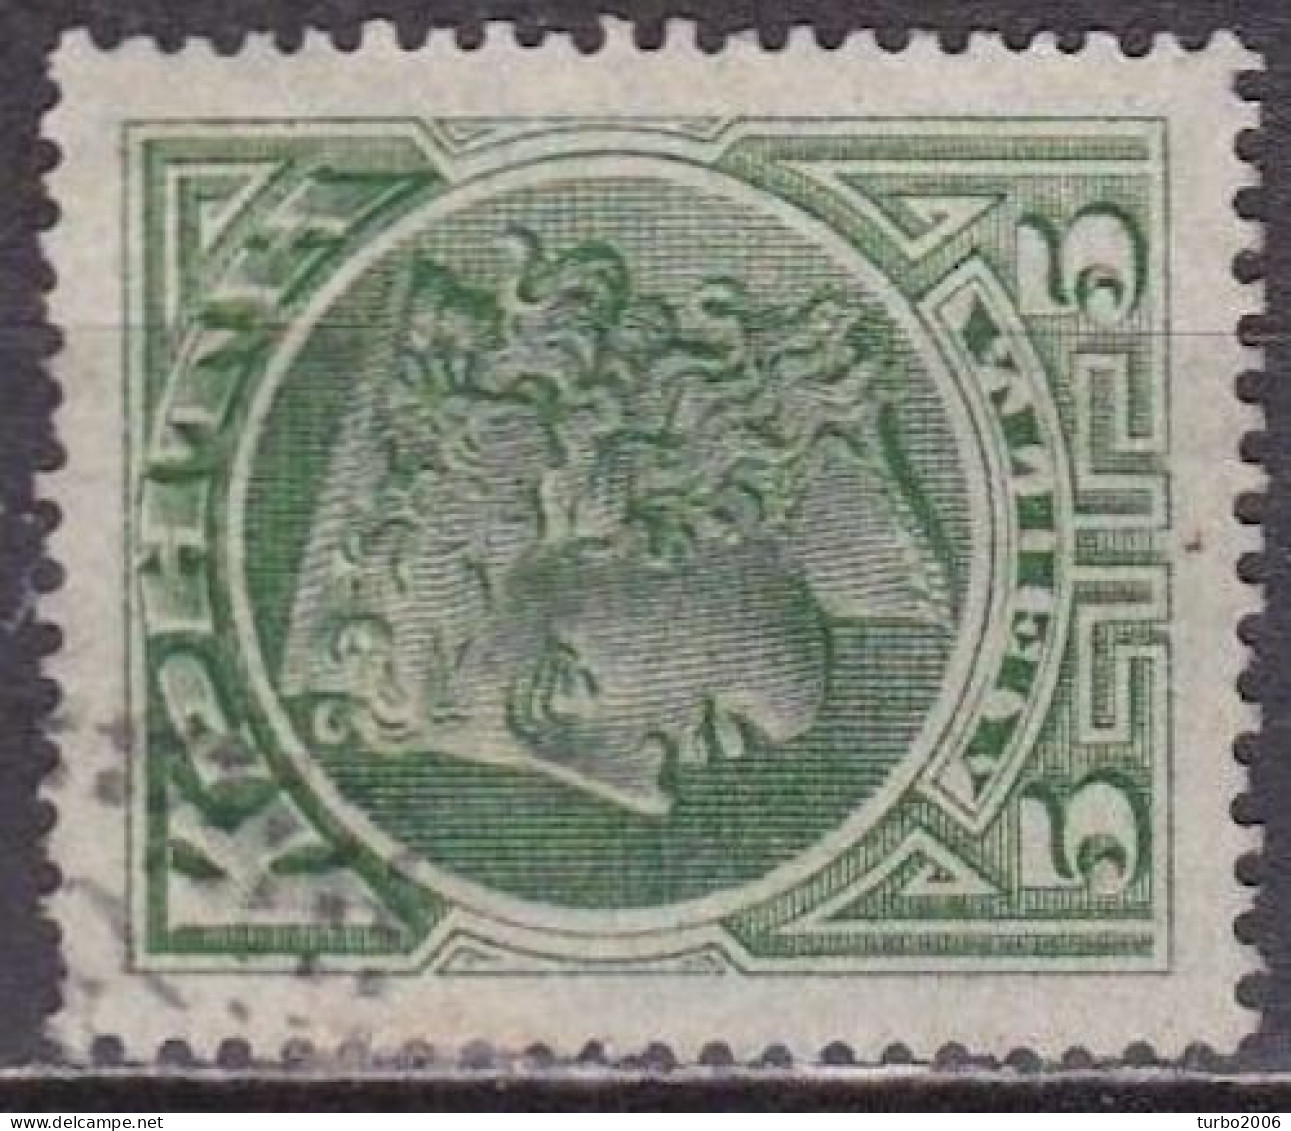 CRETE 1900 1st Issue Of The Cretan State 5 L. Green Vl. 2 With Dotted Rural Cancellation 8 - Kreta